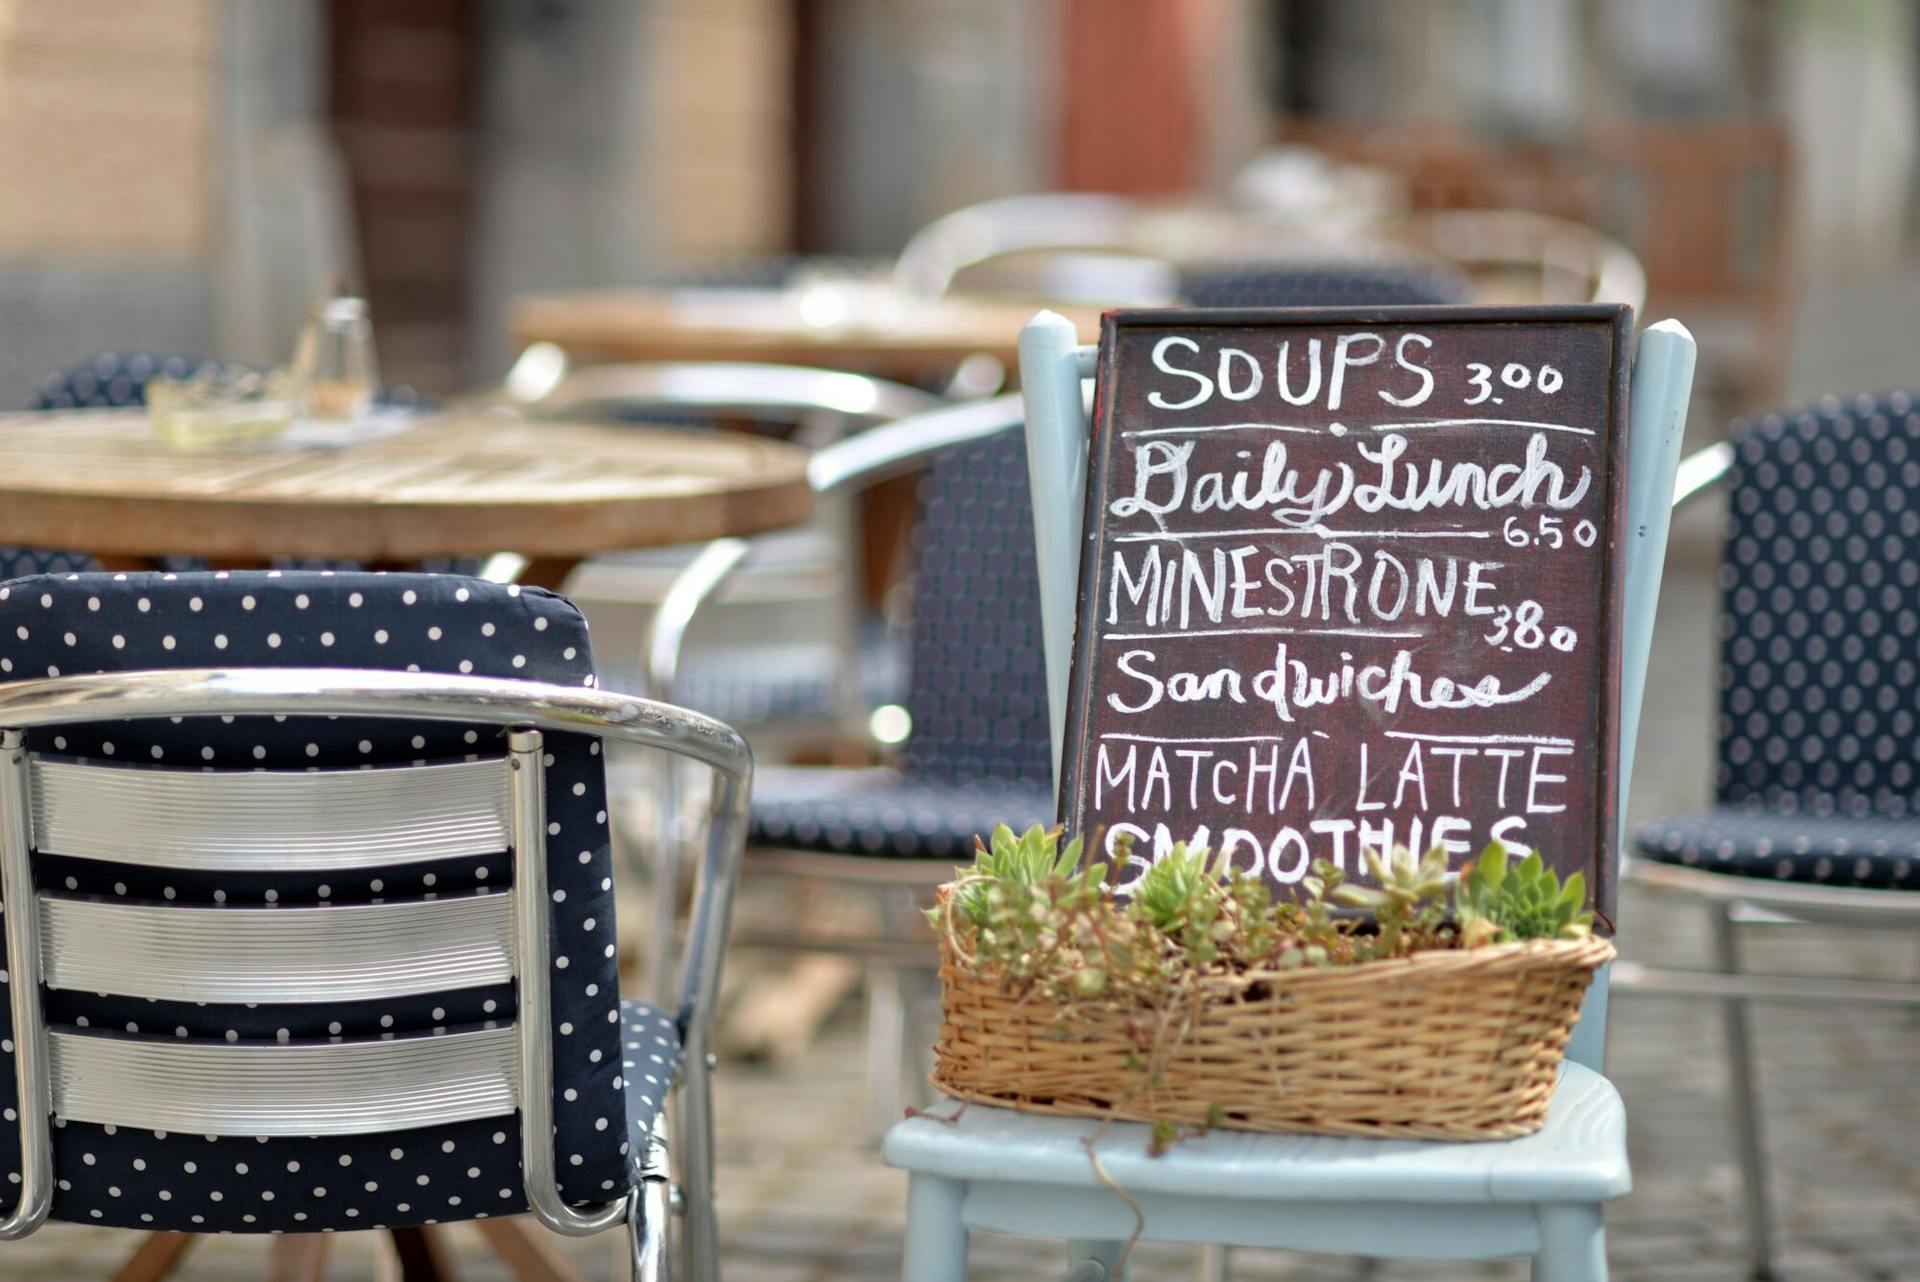 23 Restaurant Marketing Ideas to Drive Revenue and Loyalty